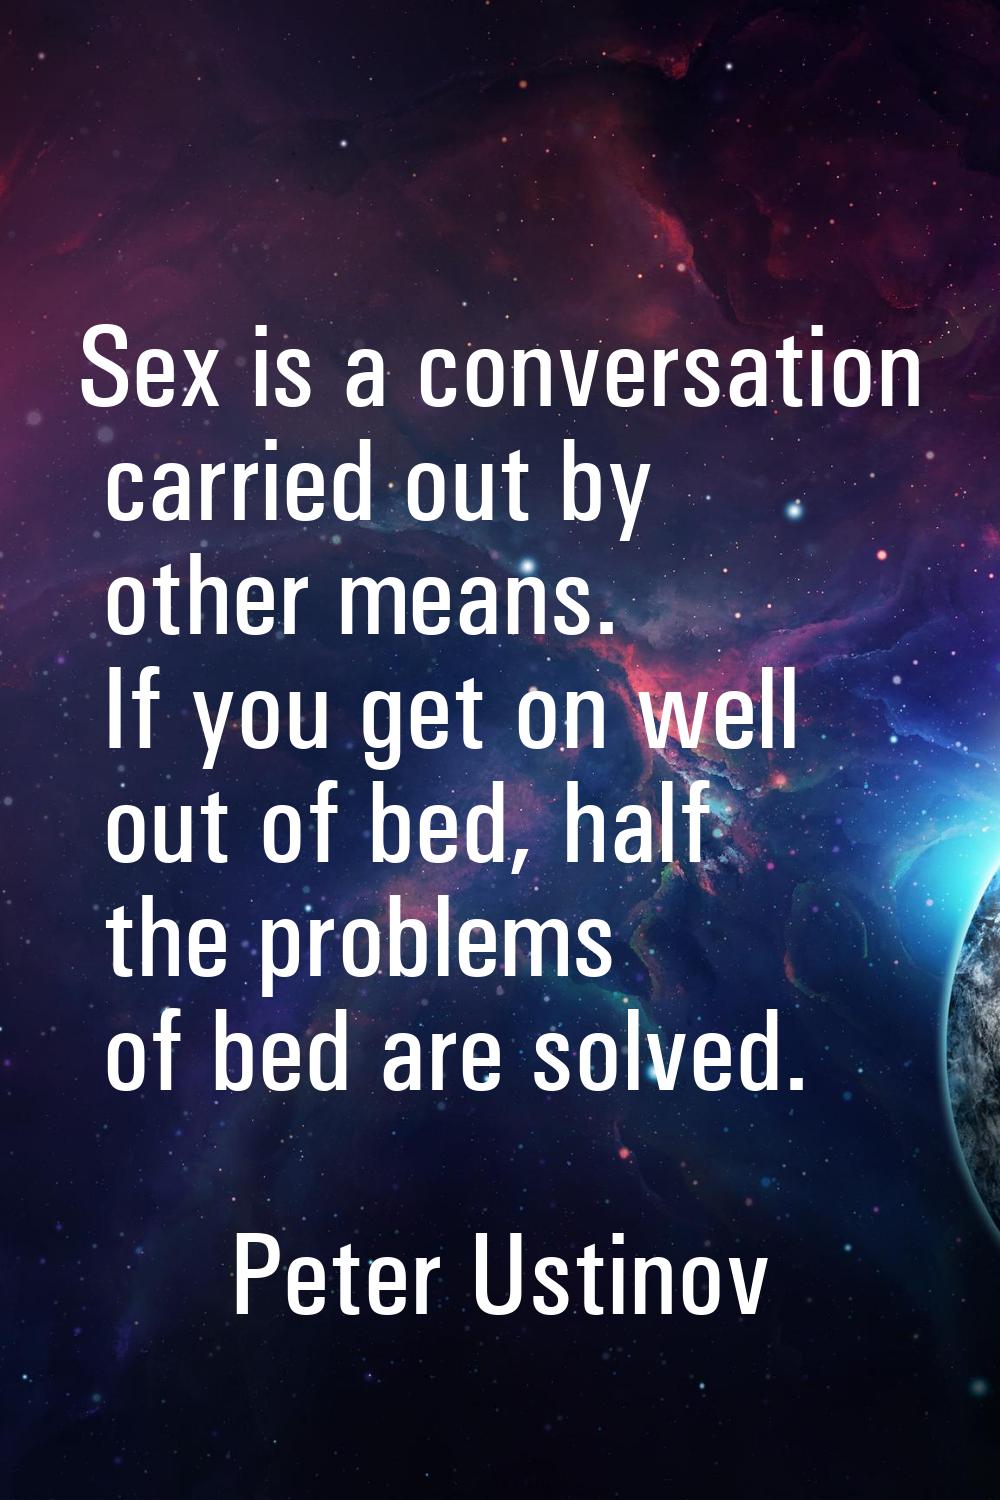 Sex is a conversation carried out by other means. If you get on well out of bed, half the problems 